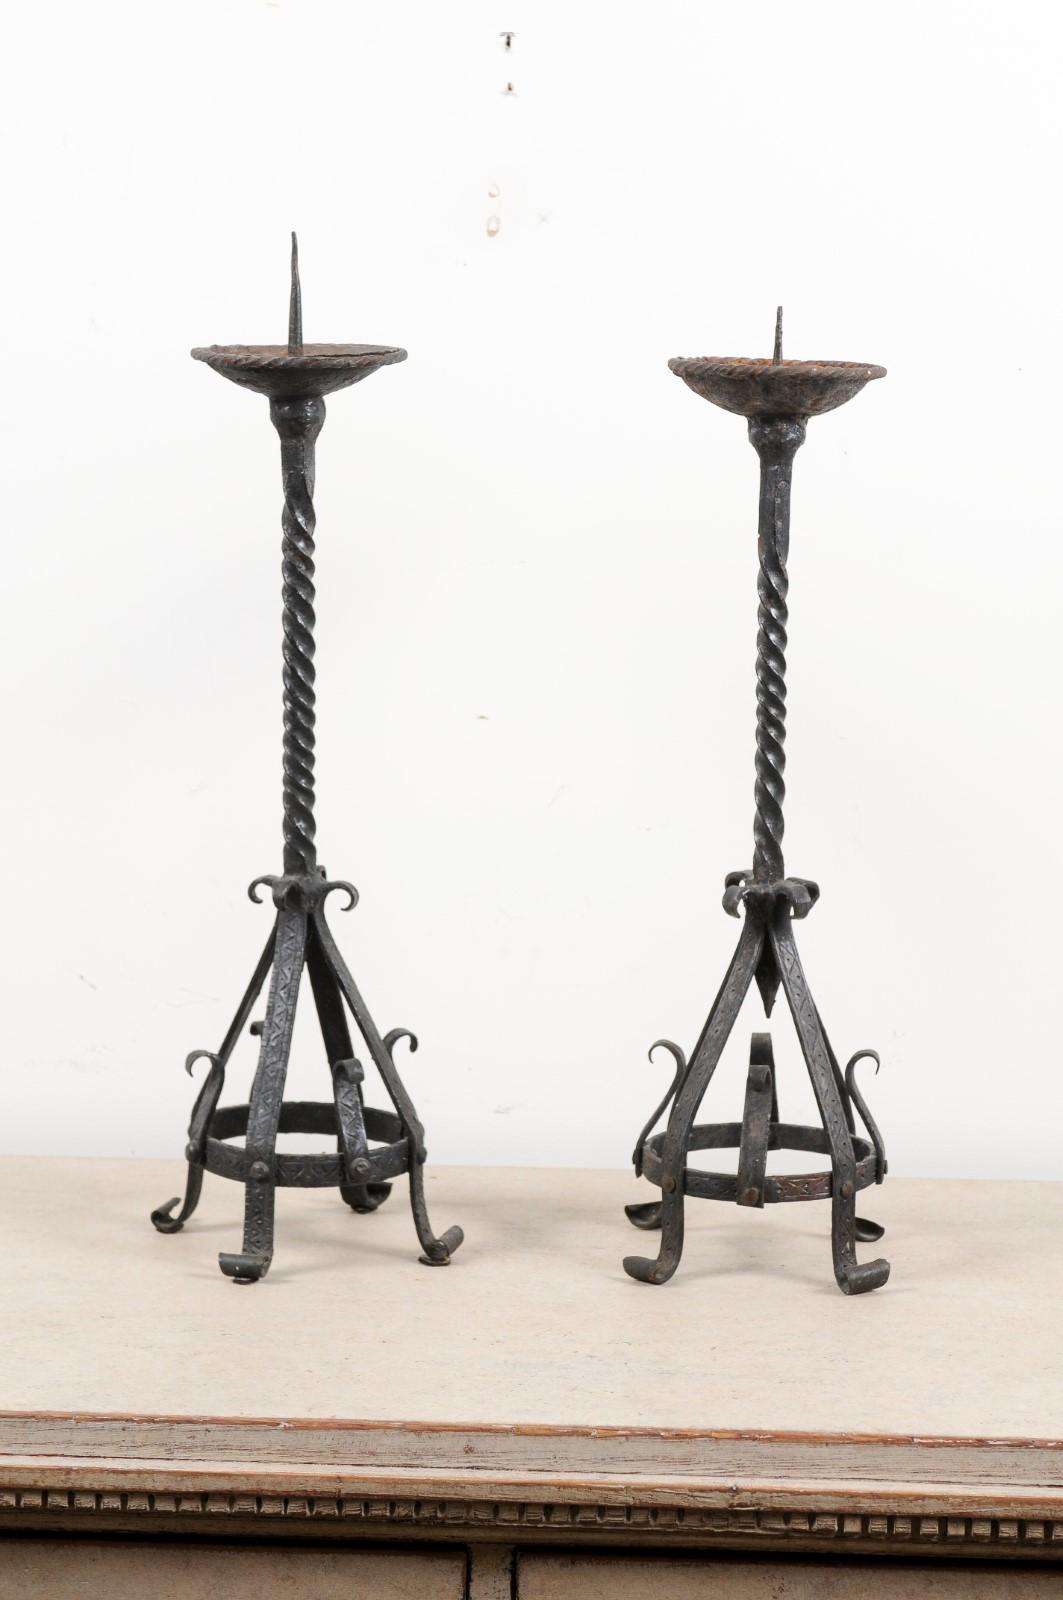 A pair of English iron candlesticks from the 19th century, with twisted accents and scrolling feet. Born in England during the 19th century, each of this pair of iron candlesticks features a twisted central staff supporting a pricket, while the